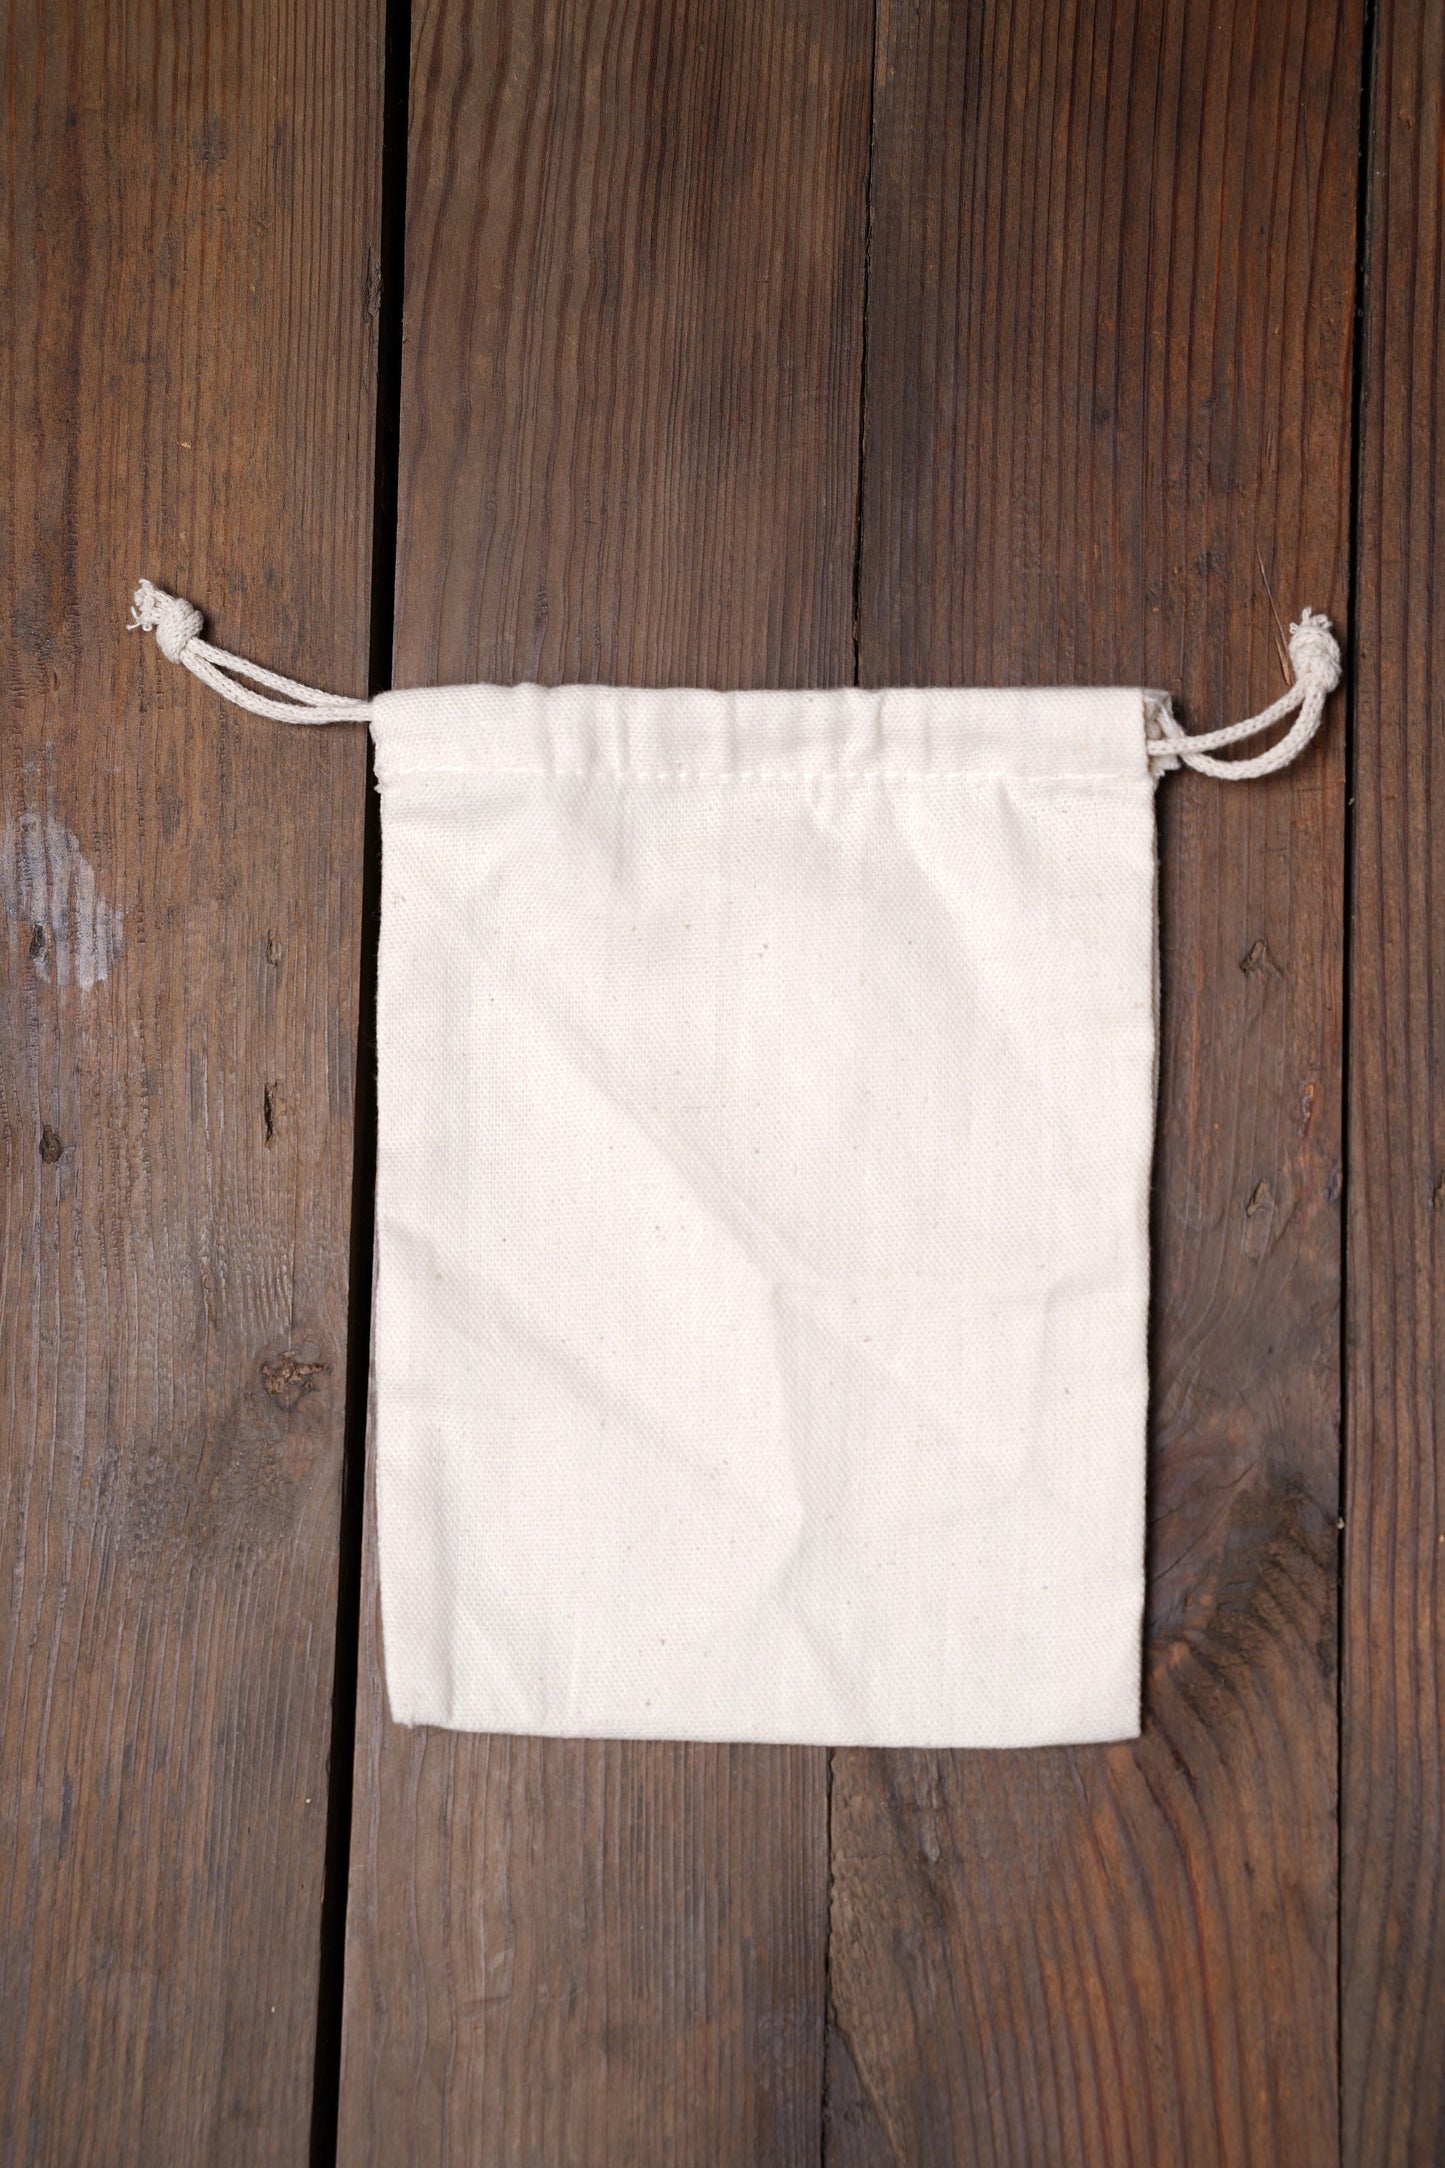 2x3 Inches Reusable Eco-Friendly Double Drawstring Cotton CANVAS Bags Natural Color